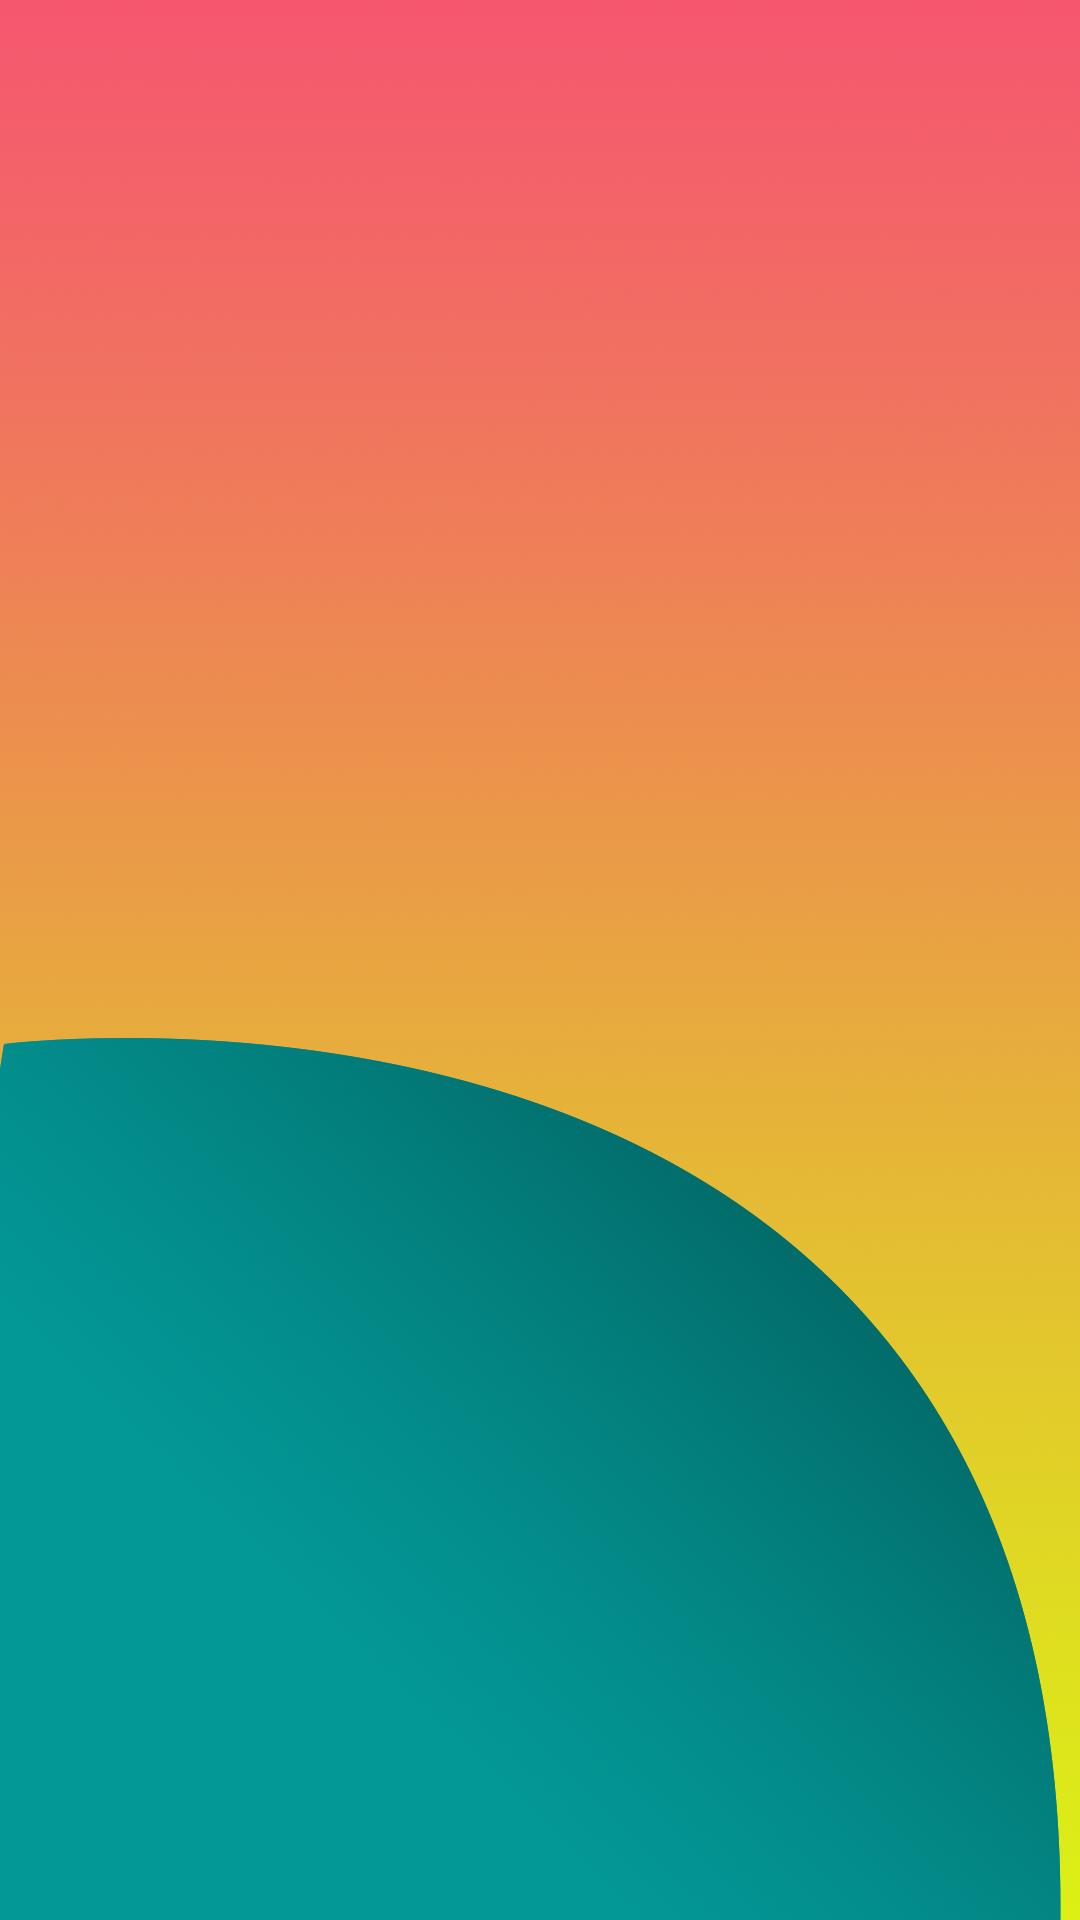 Download the Android 4.4 KitKat Wallpapers & Icons Set | Droid Doc